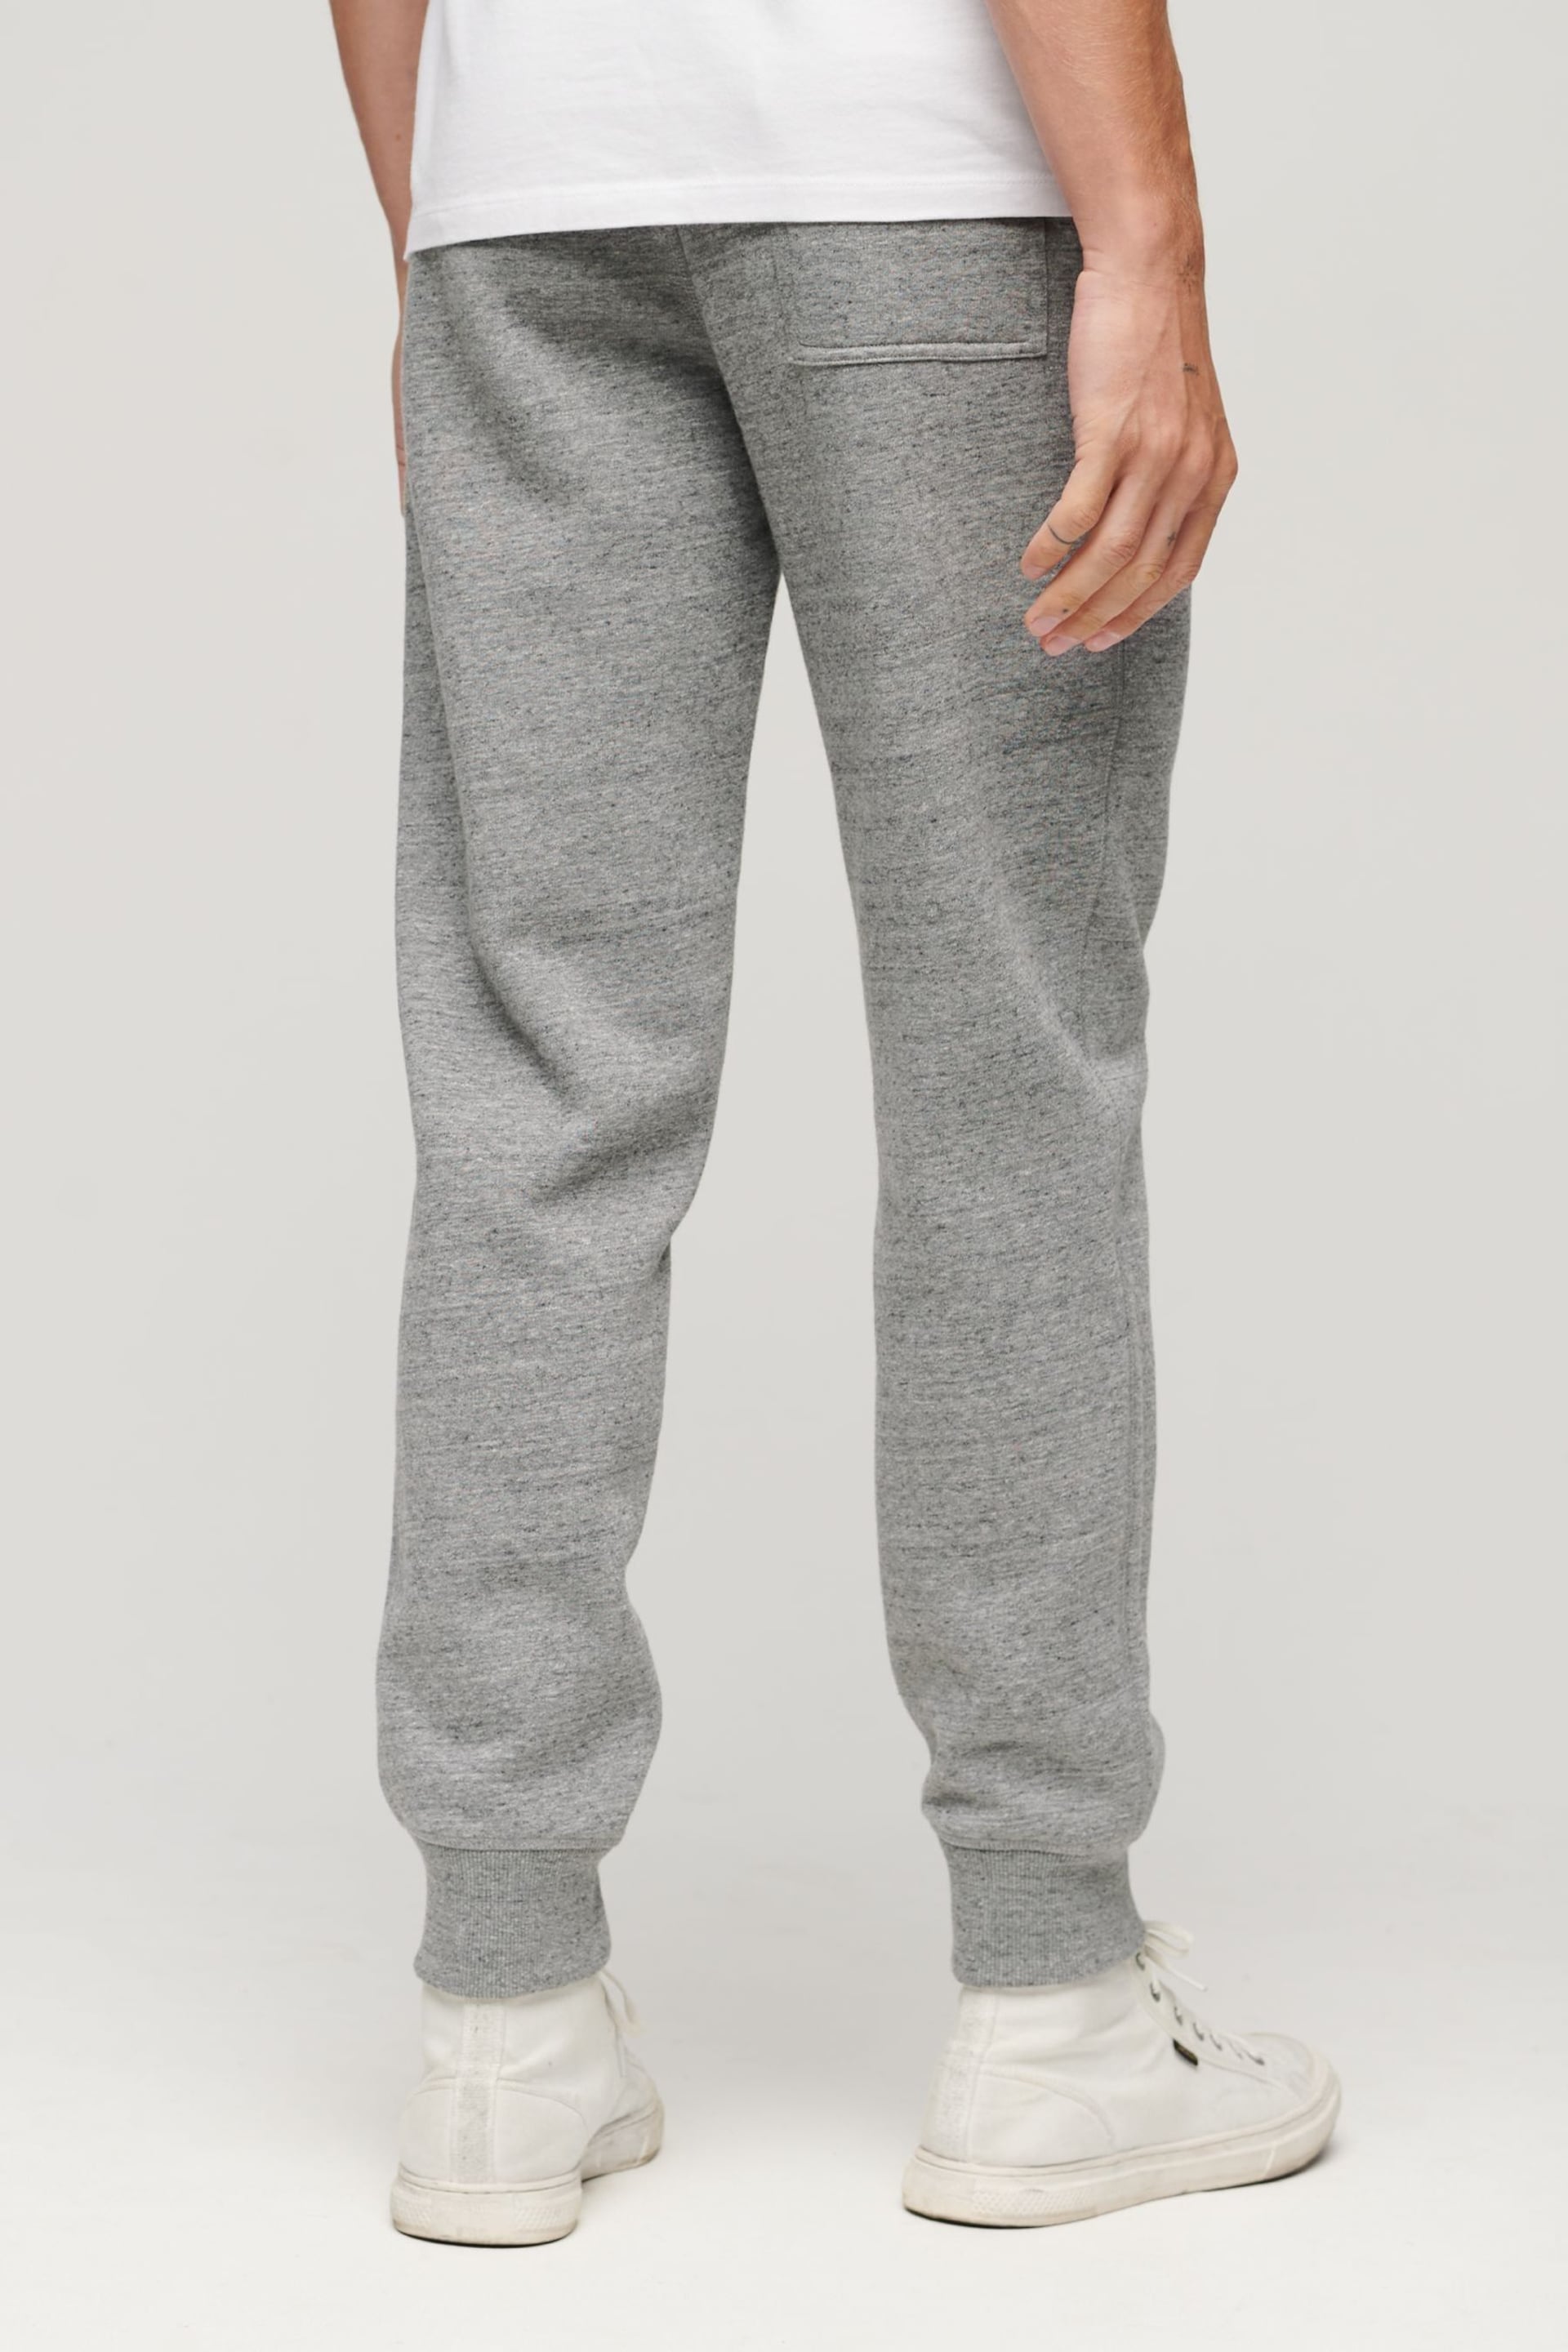 Superdry Grey Essential Logo Joggers - Image 3 of 6